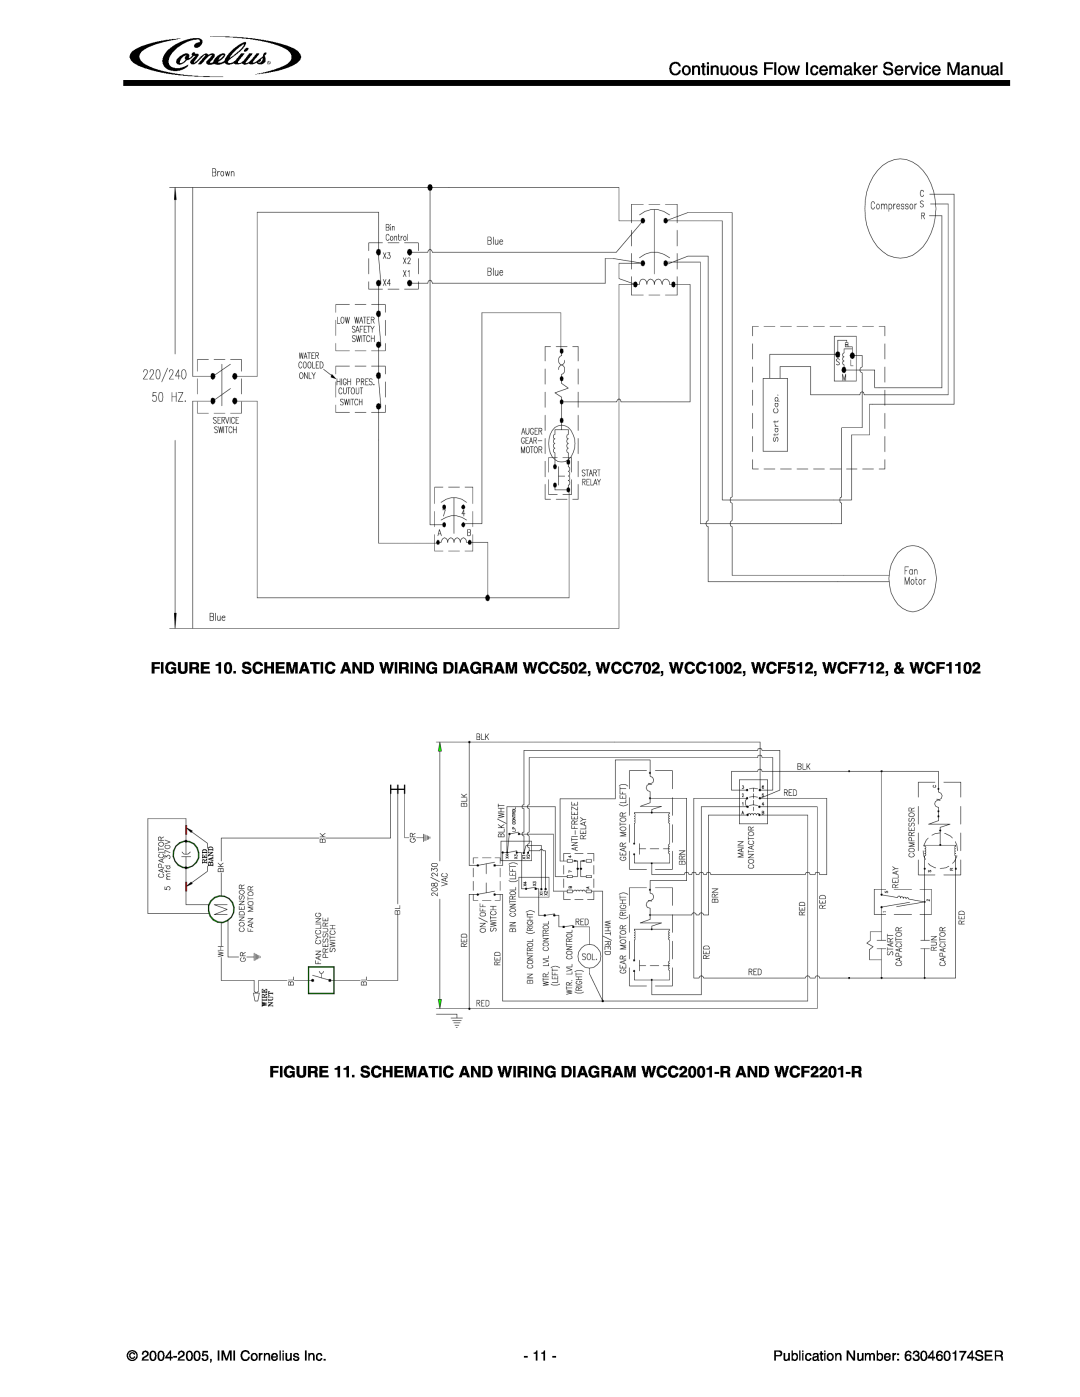 Cornelius 500 - Series Continuous Flow Icemaker Service Manual, SCHEMATIC AND WIRING DIAGRAM WCC2001-R AND WCF2201-R 